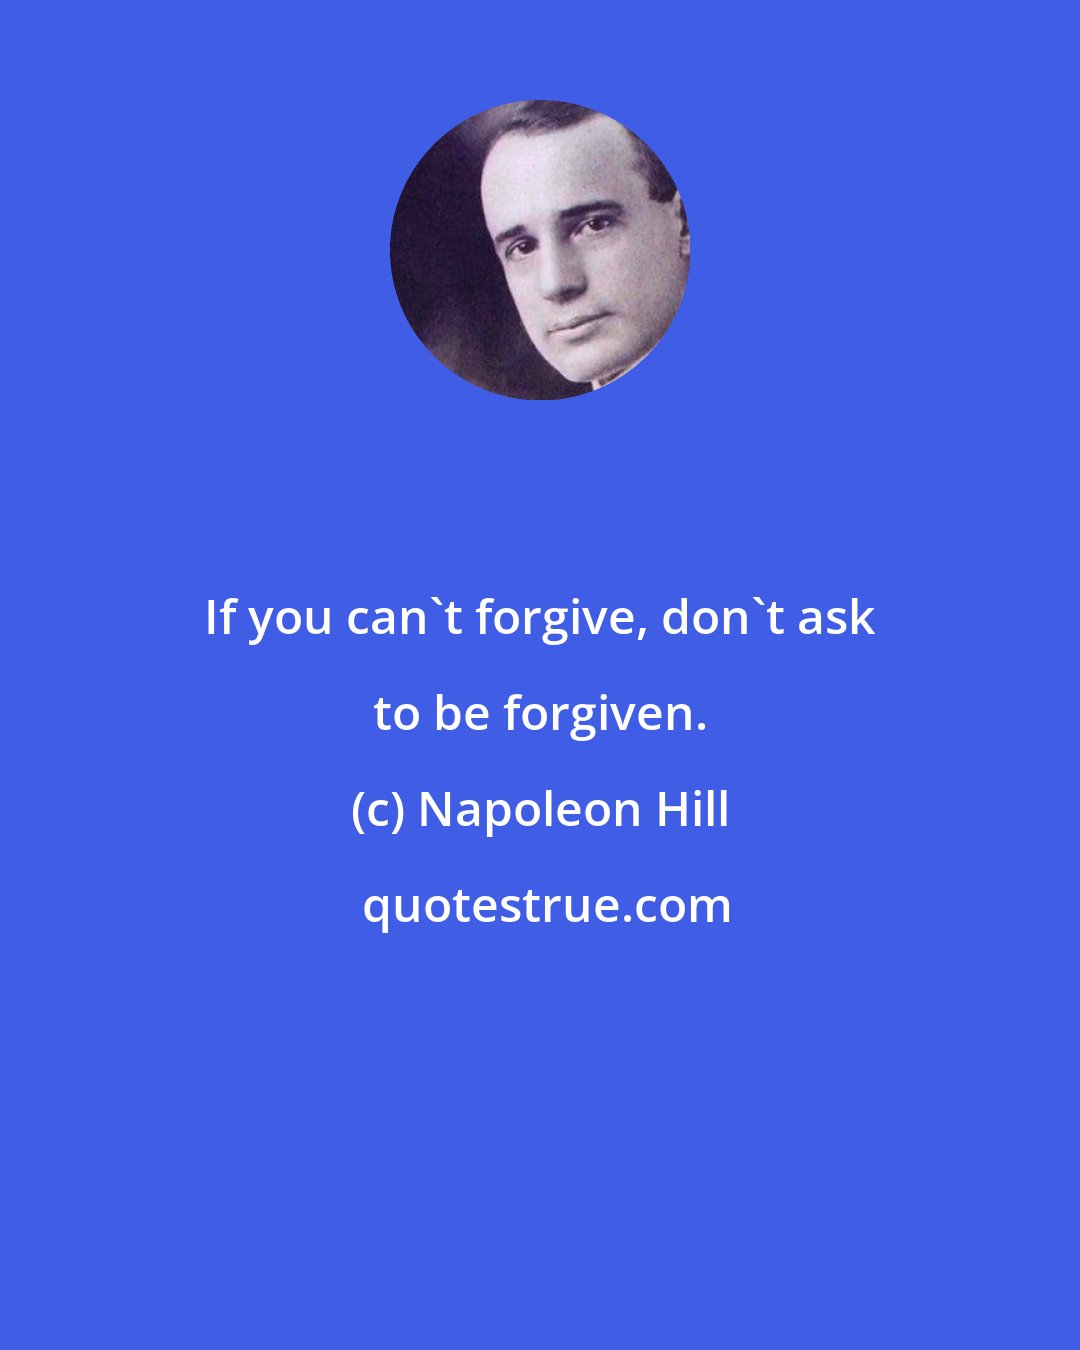 Napoleon Hill: If you can't forgive, don't ask to be forgiven.